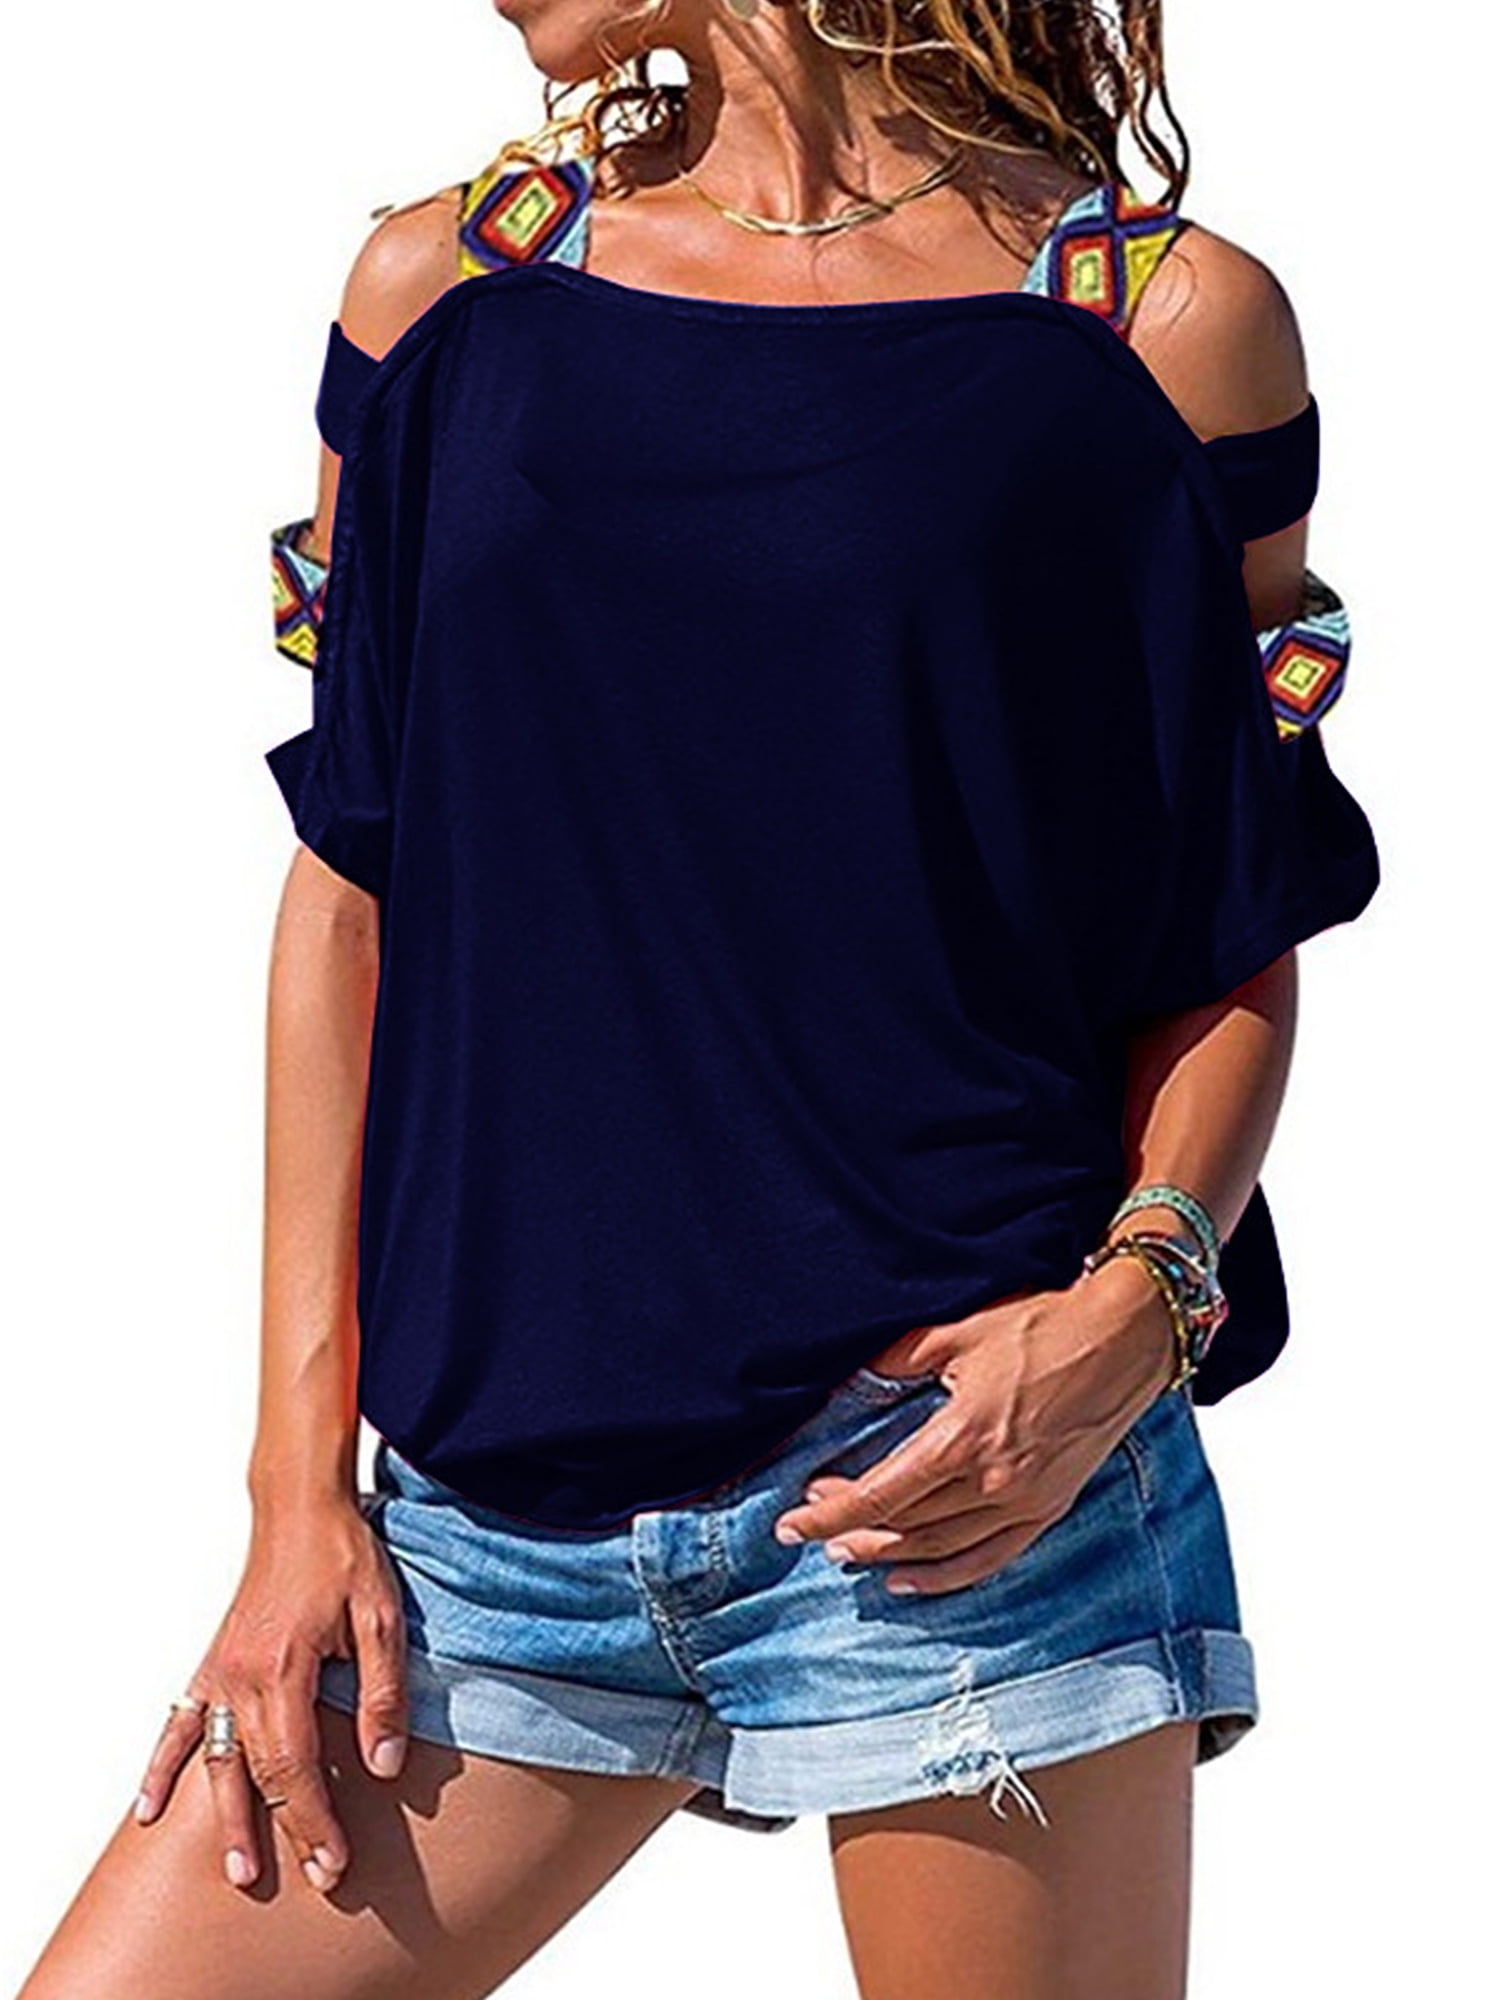 Summer Cold Shoulder Strappy Long Sleeve Baggy T Shirts Women Casual Tops Blouse